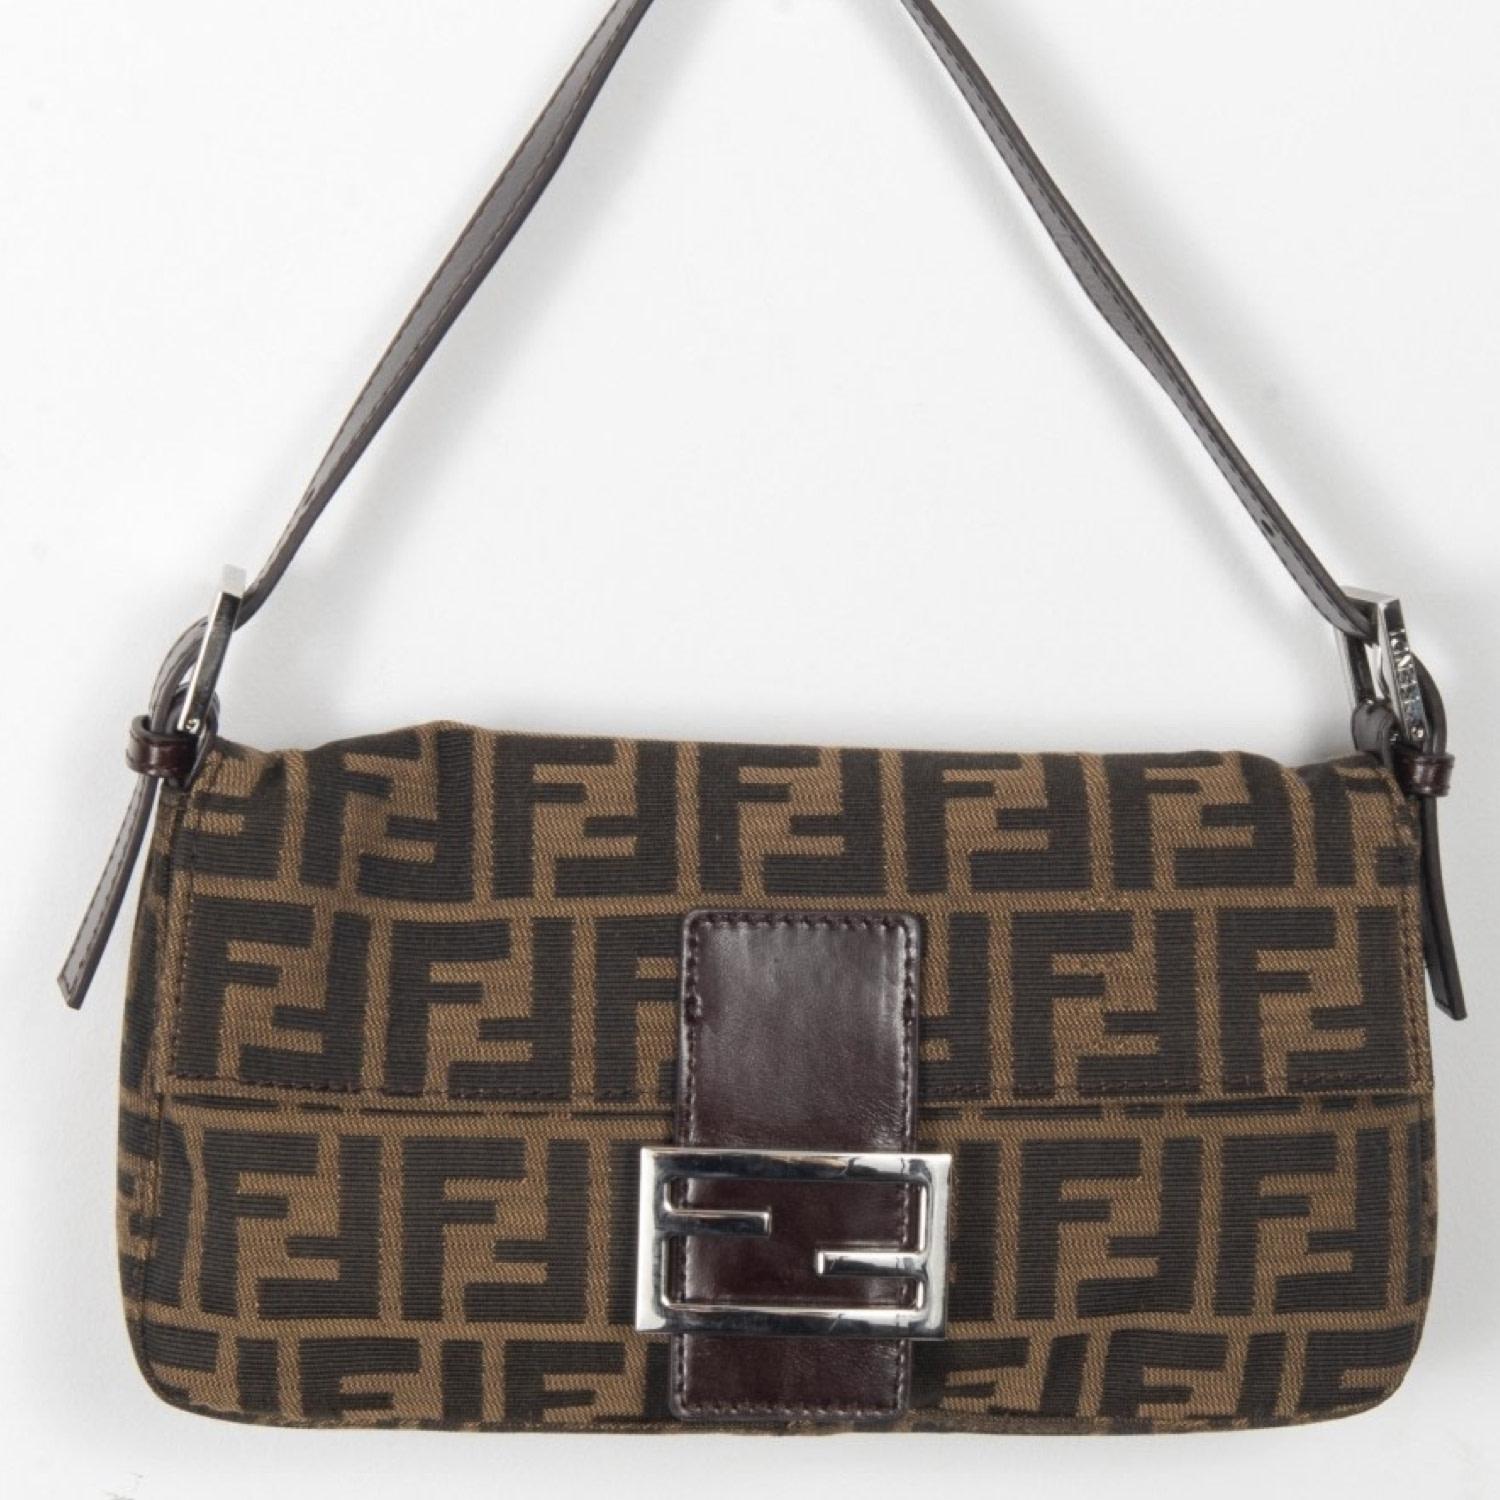 The Fendi baguette is one of the brands most iconic styles. This particular one features the Fendi Zucca monogram print on canvas with leather handles, leather trim and brown fabric interior lining. A metal Fendi logo on the front flap with snap